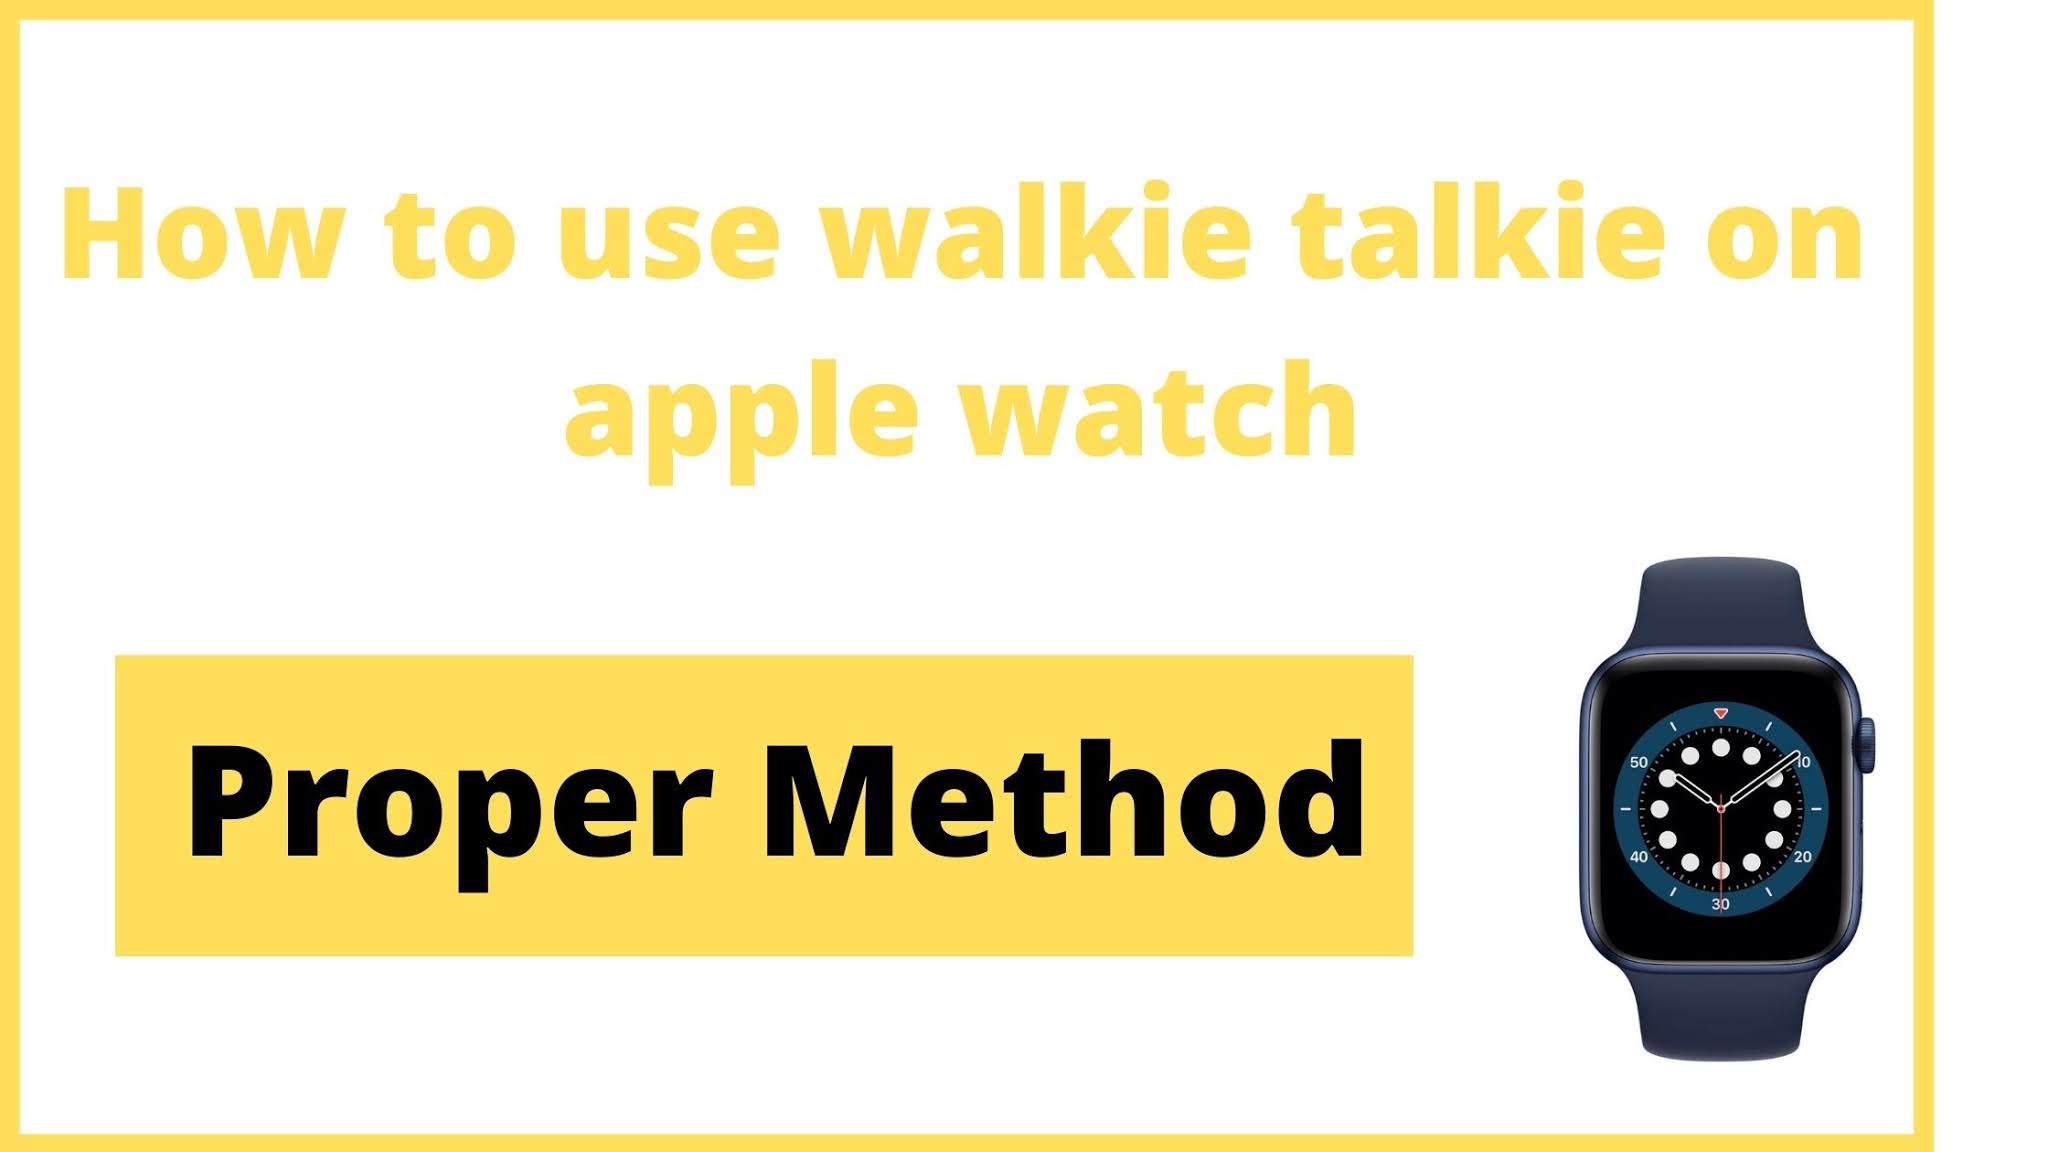 How to use walkie talkie on apple watch